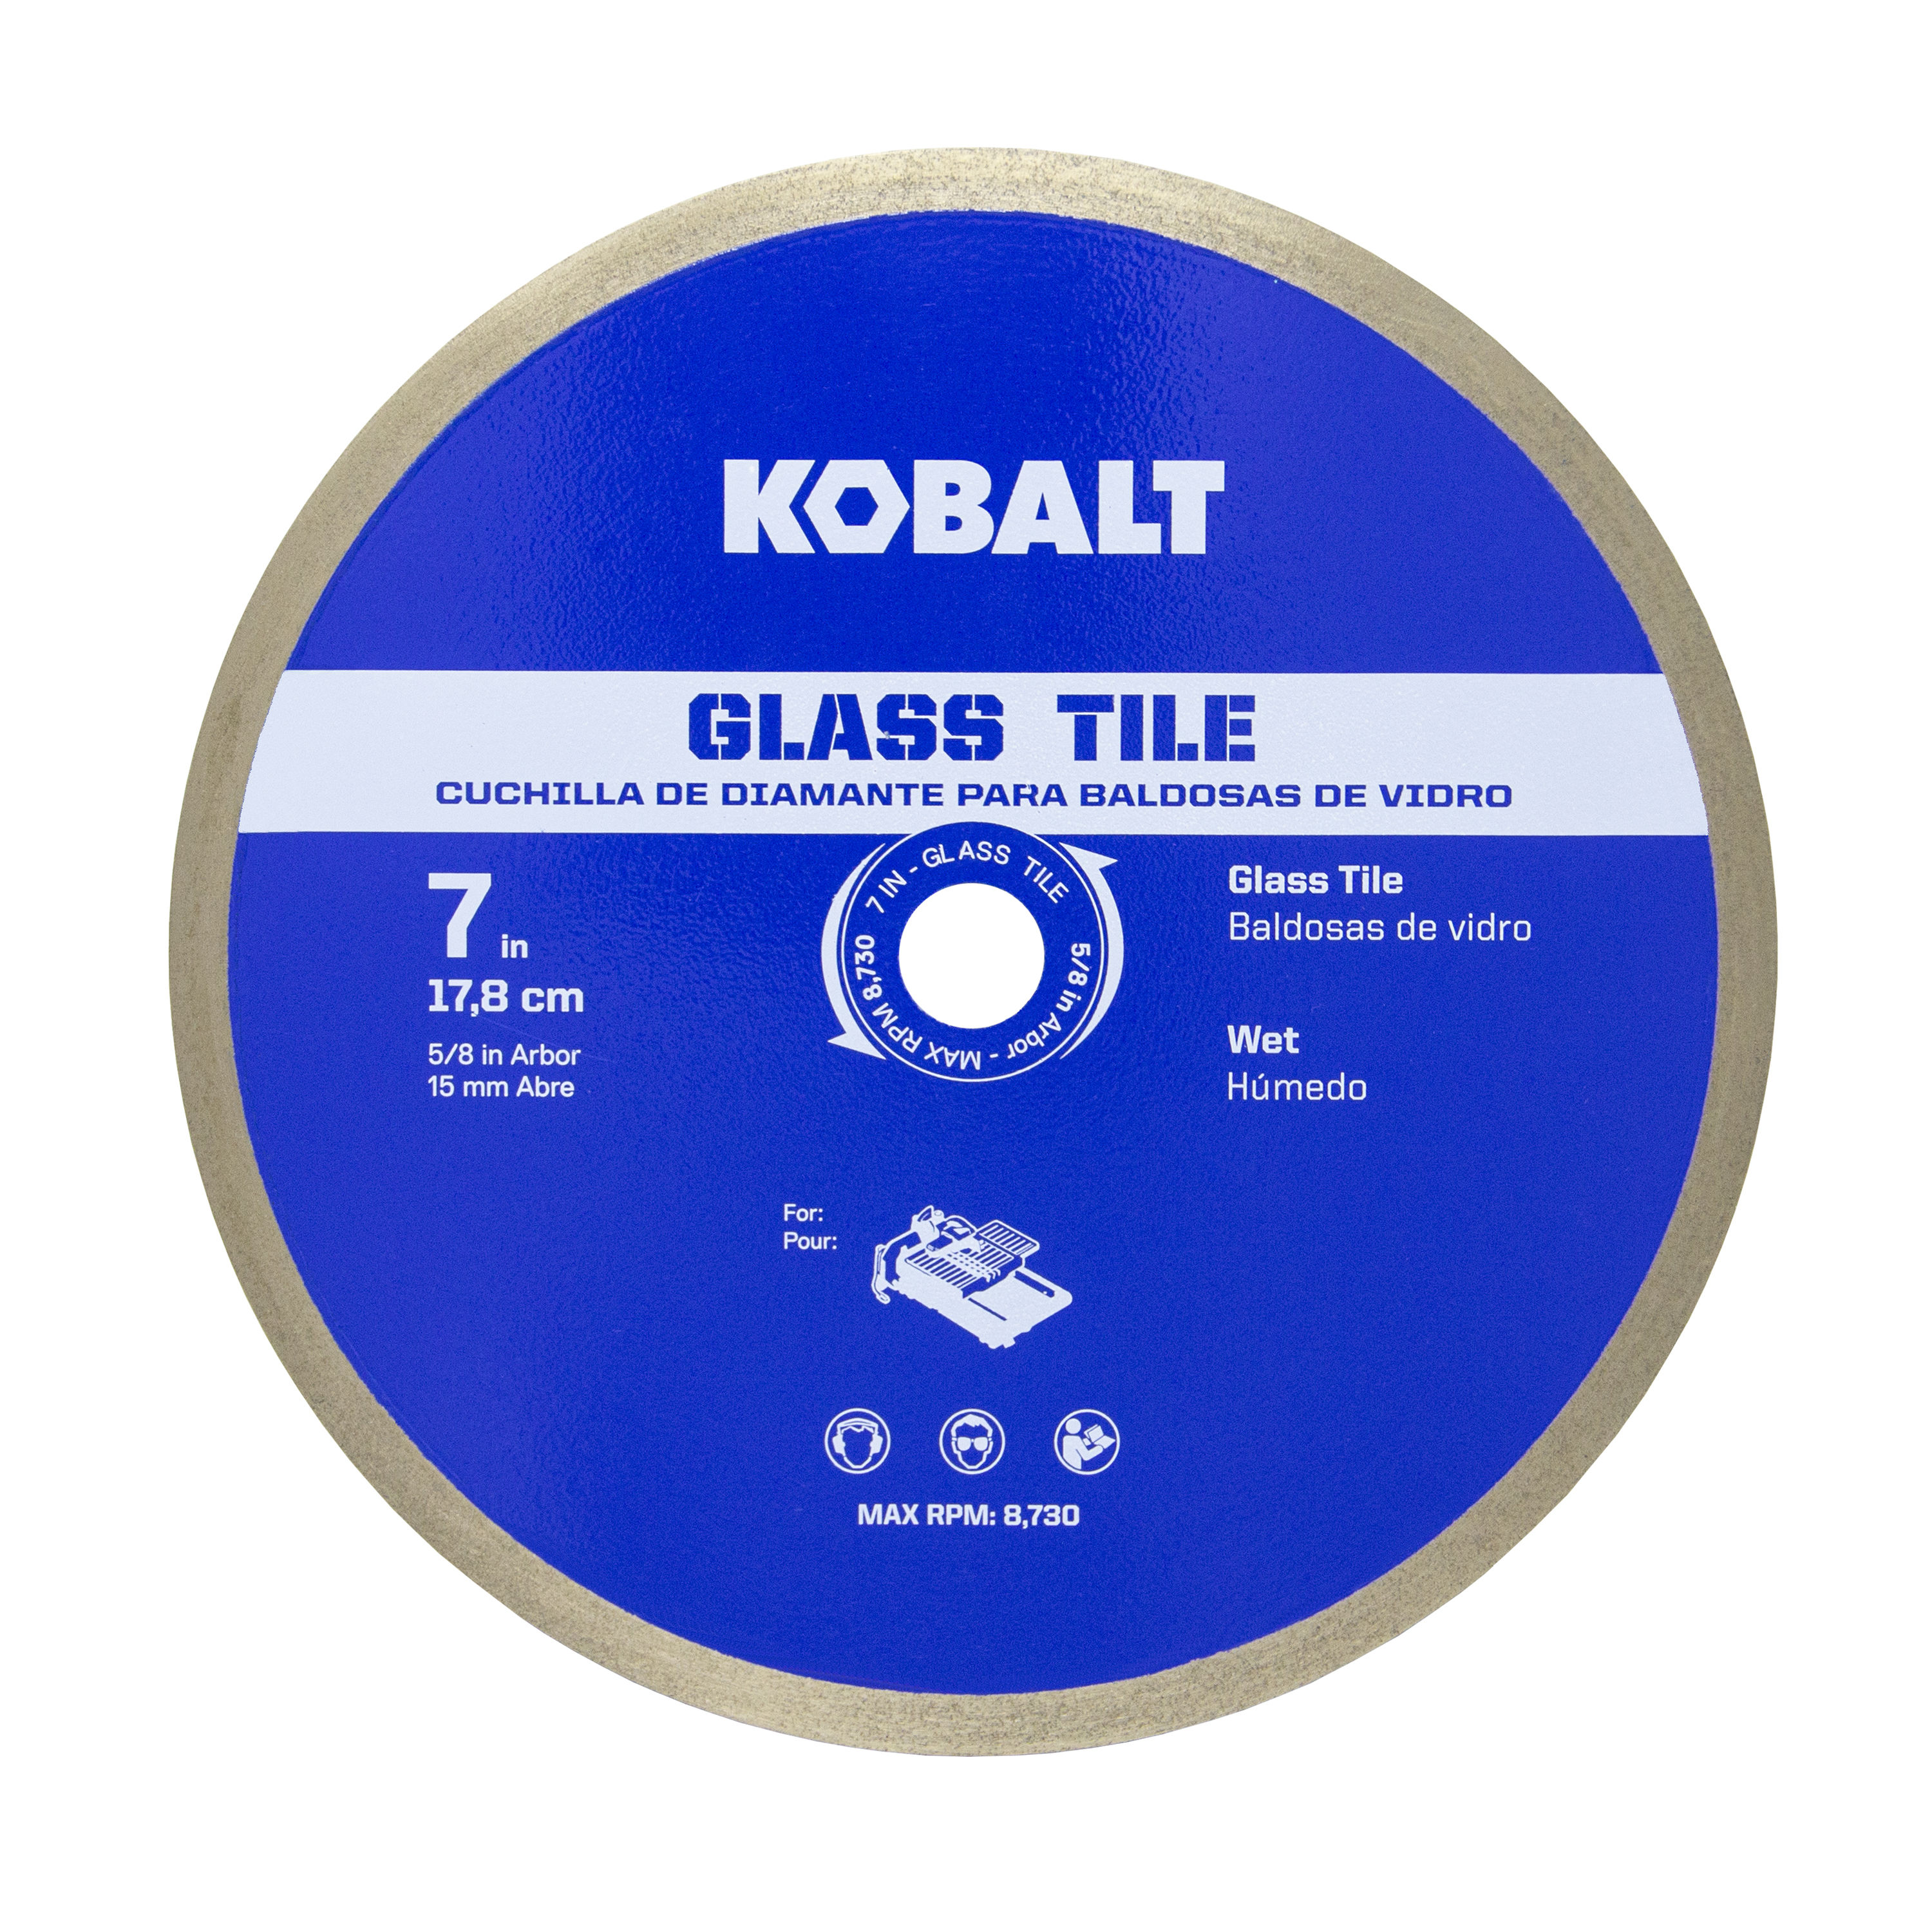 The reason why you should use a Manual tile cutter instead of a diamond  blade when cutting glass tiles and glass mosaic - Montolit